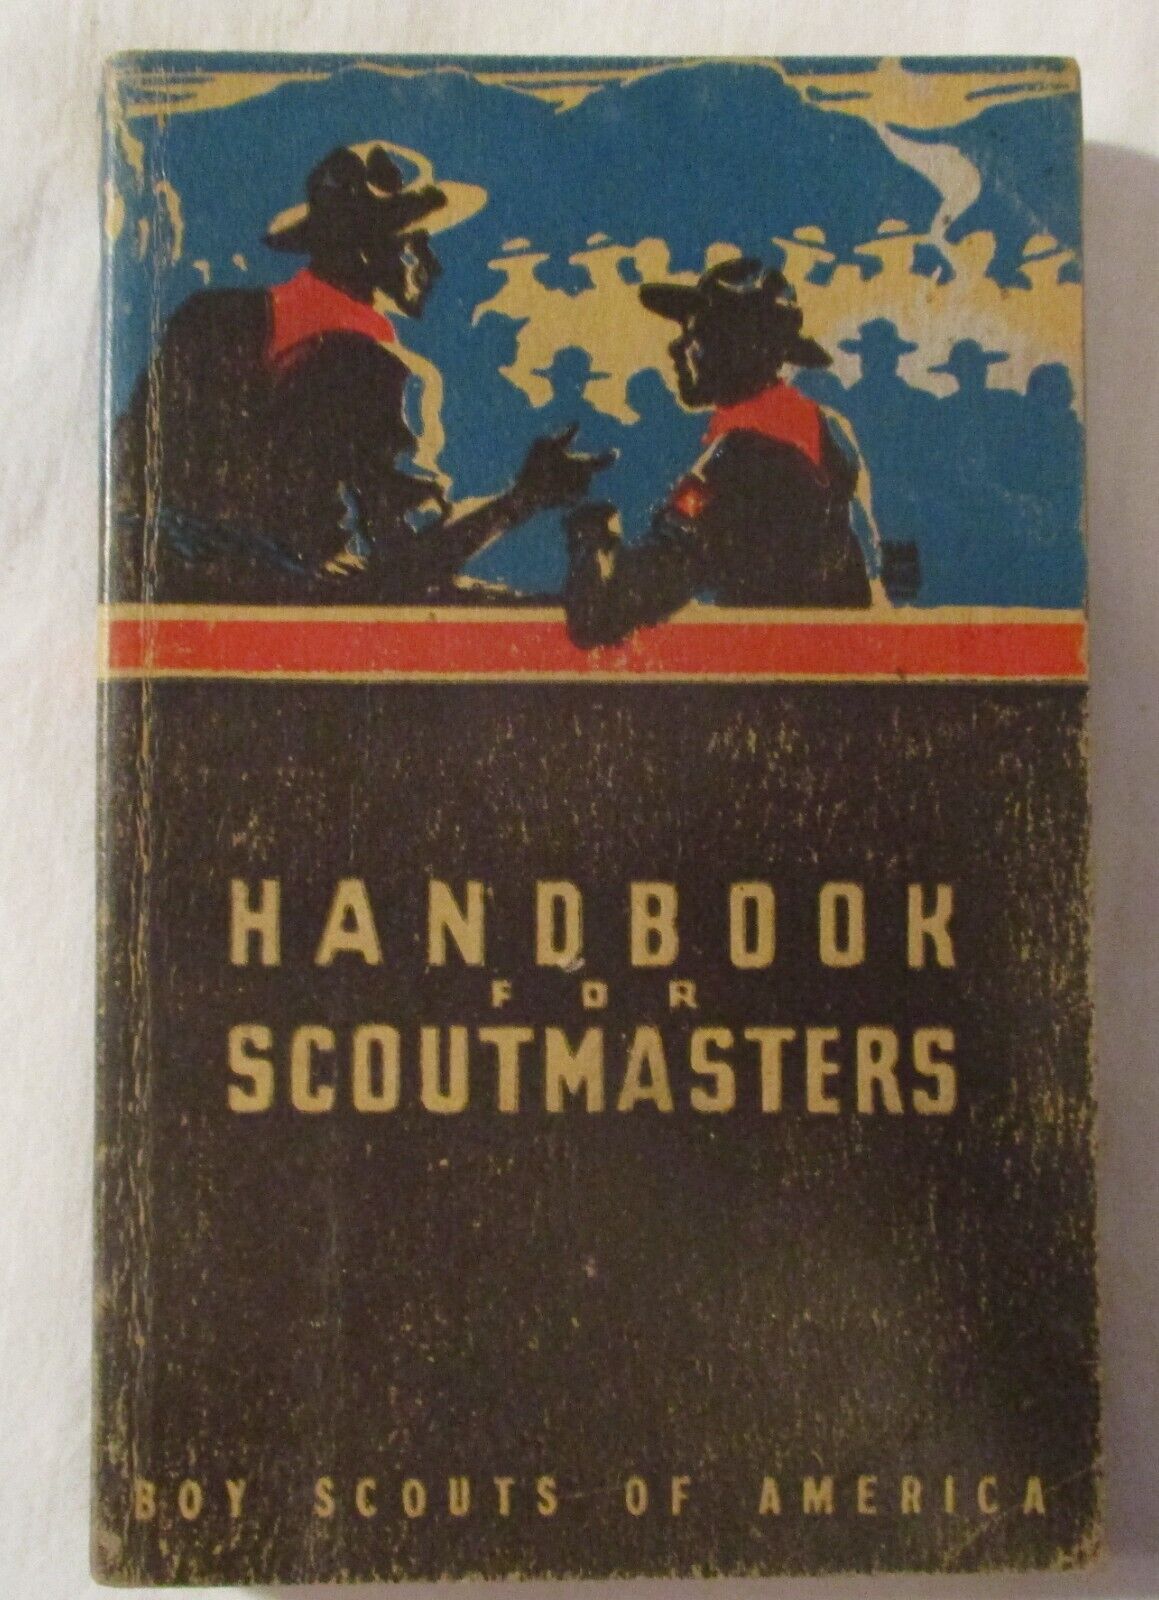 BSA “Handbook for Scoutmasters” – VINTAGE 1947 copyright (SMH03)